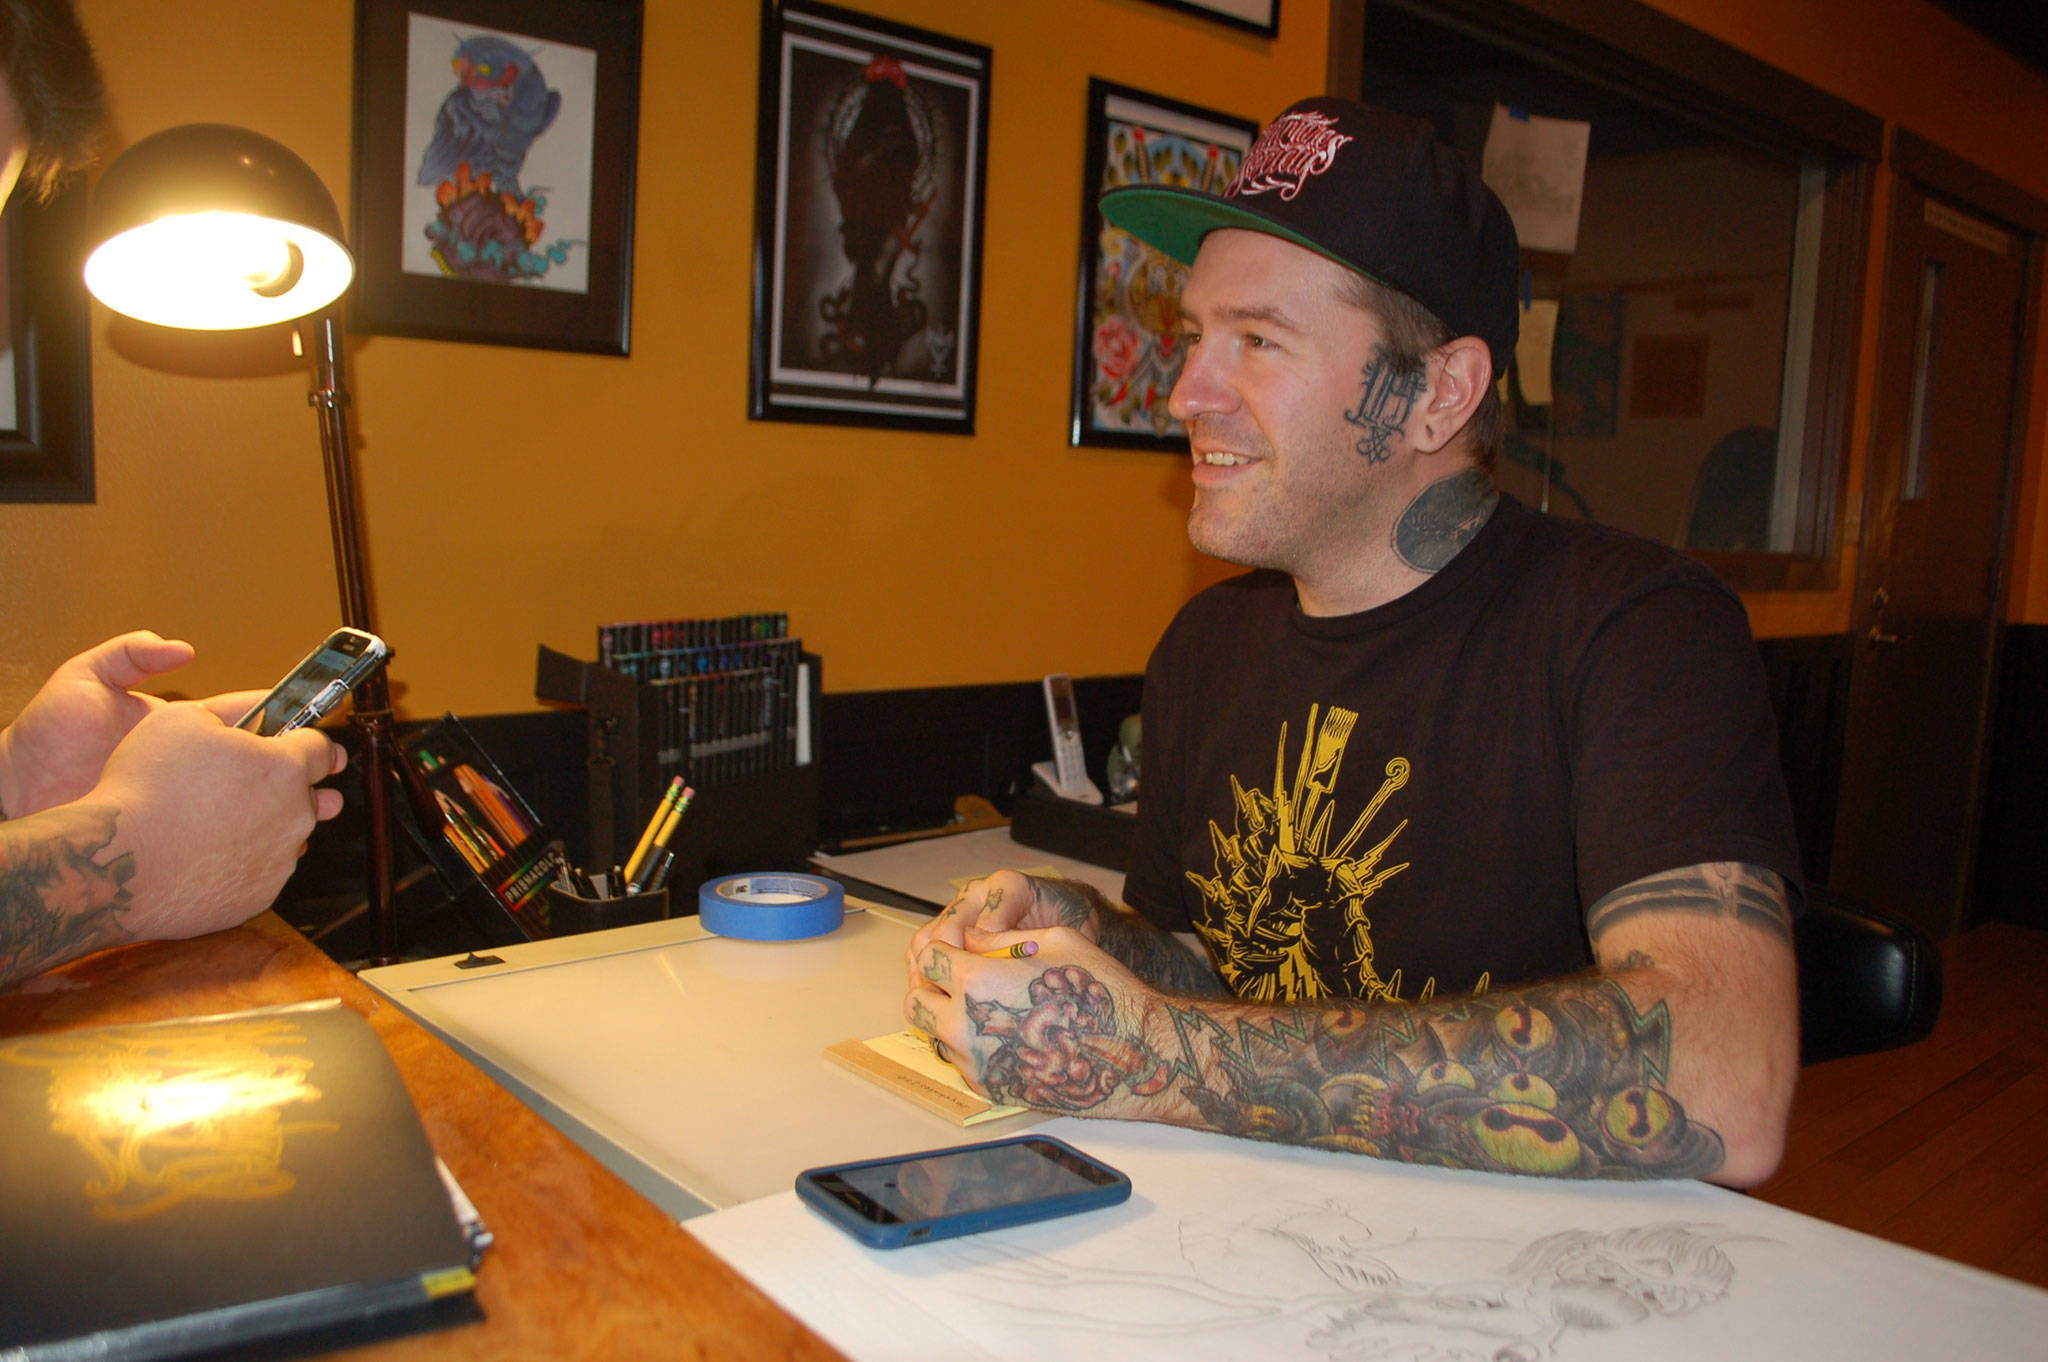 Professional tattoo artist Keith Dulin discusses tattoo design concepts with a client on the officially opening of his business Black Reign Tattoo on Nov. 25 in Sequim. Sequim Gazette photo by Erin Hawkins